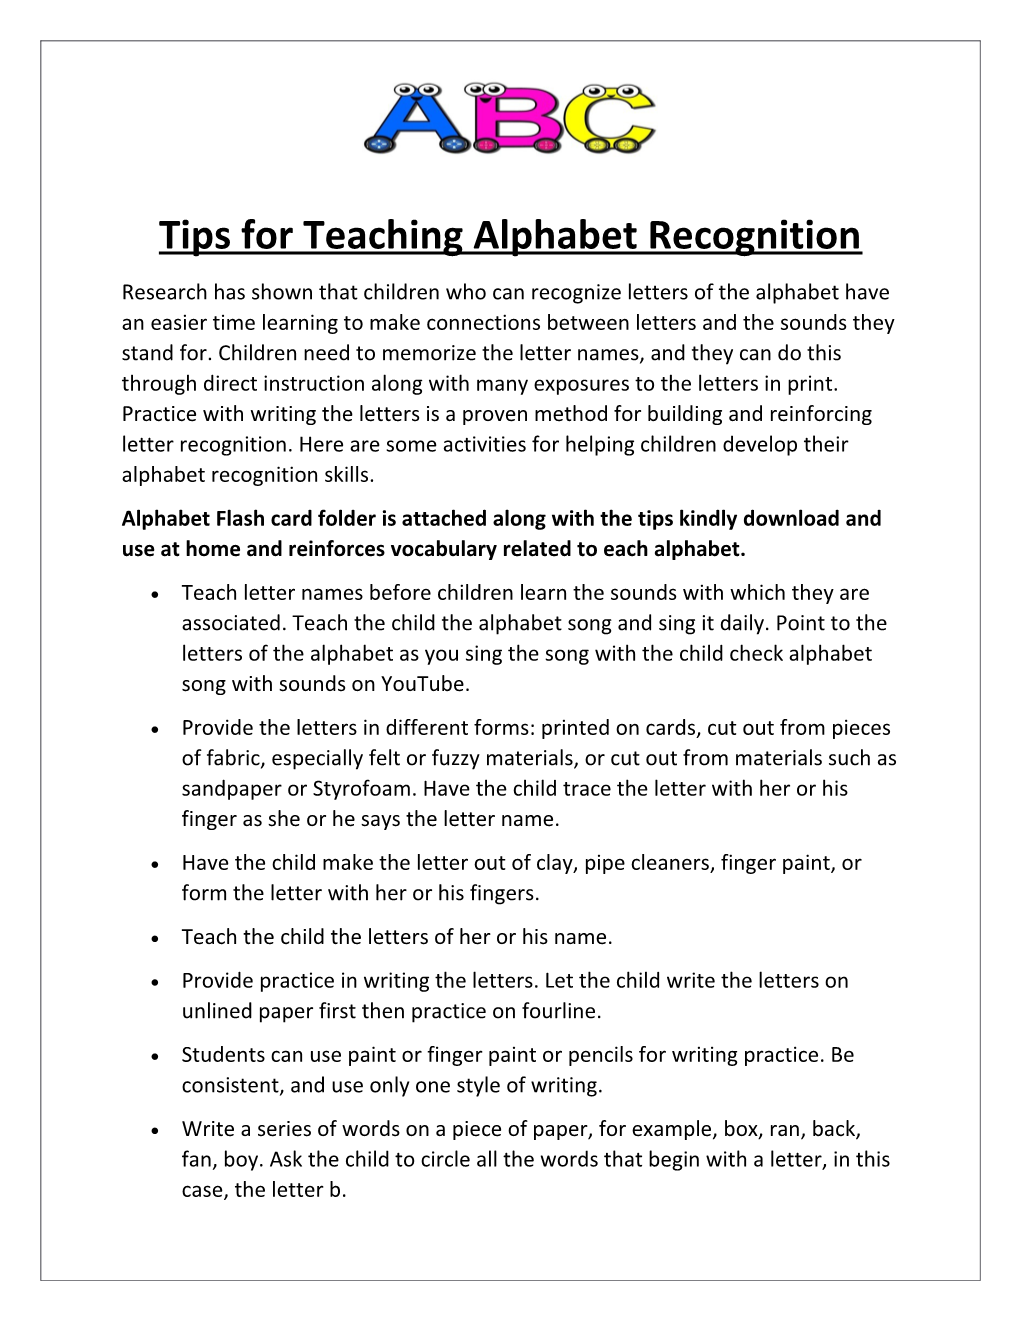 Tips for Teaching Alphabet Recognition